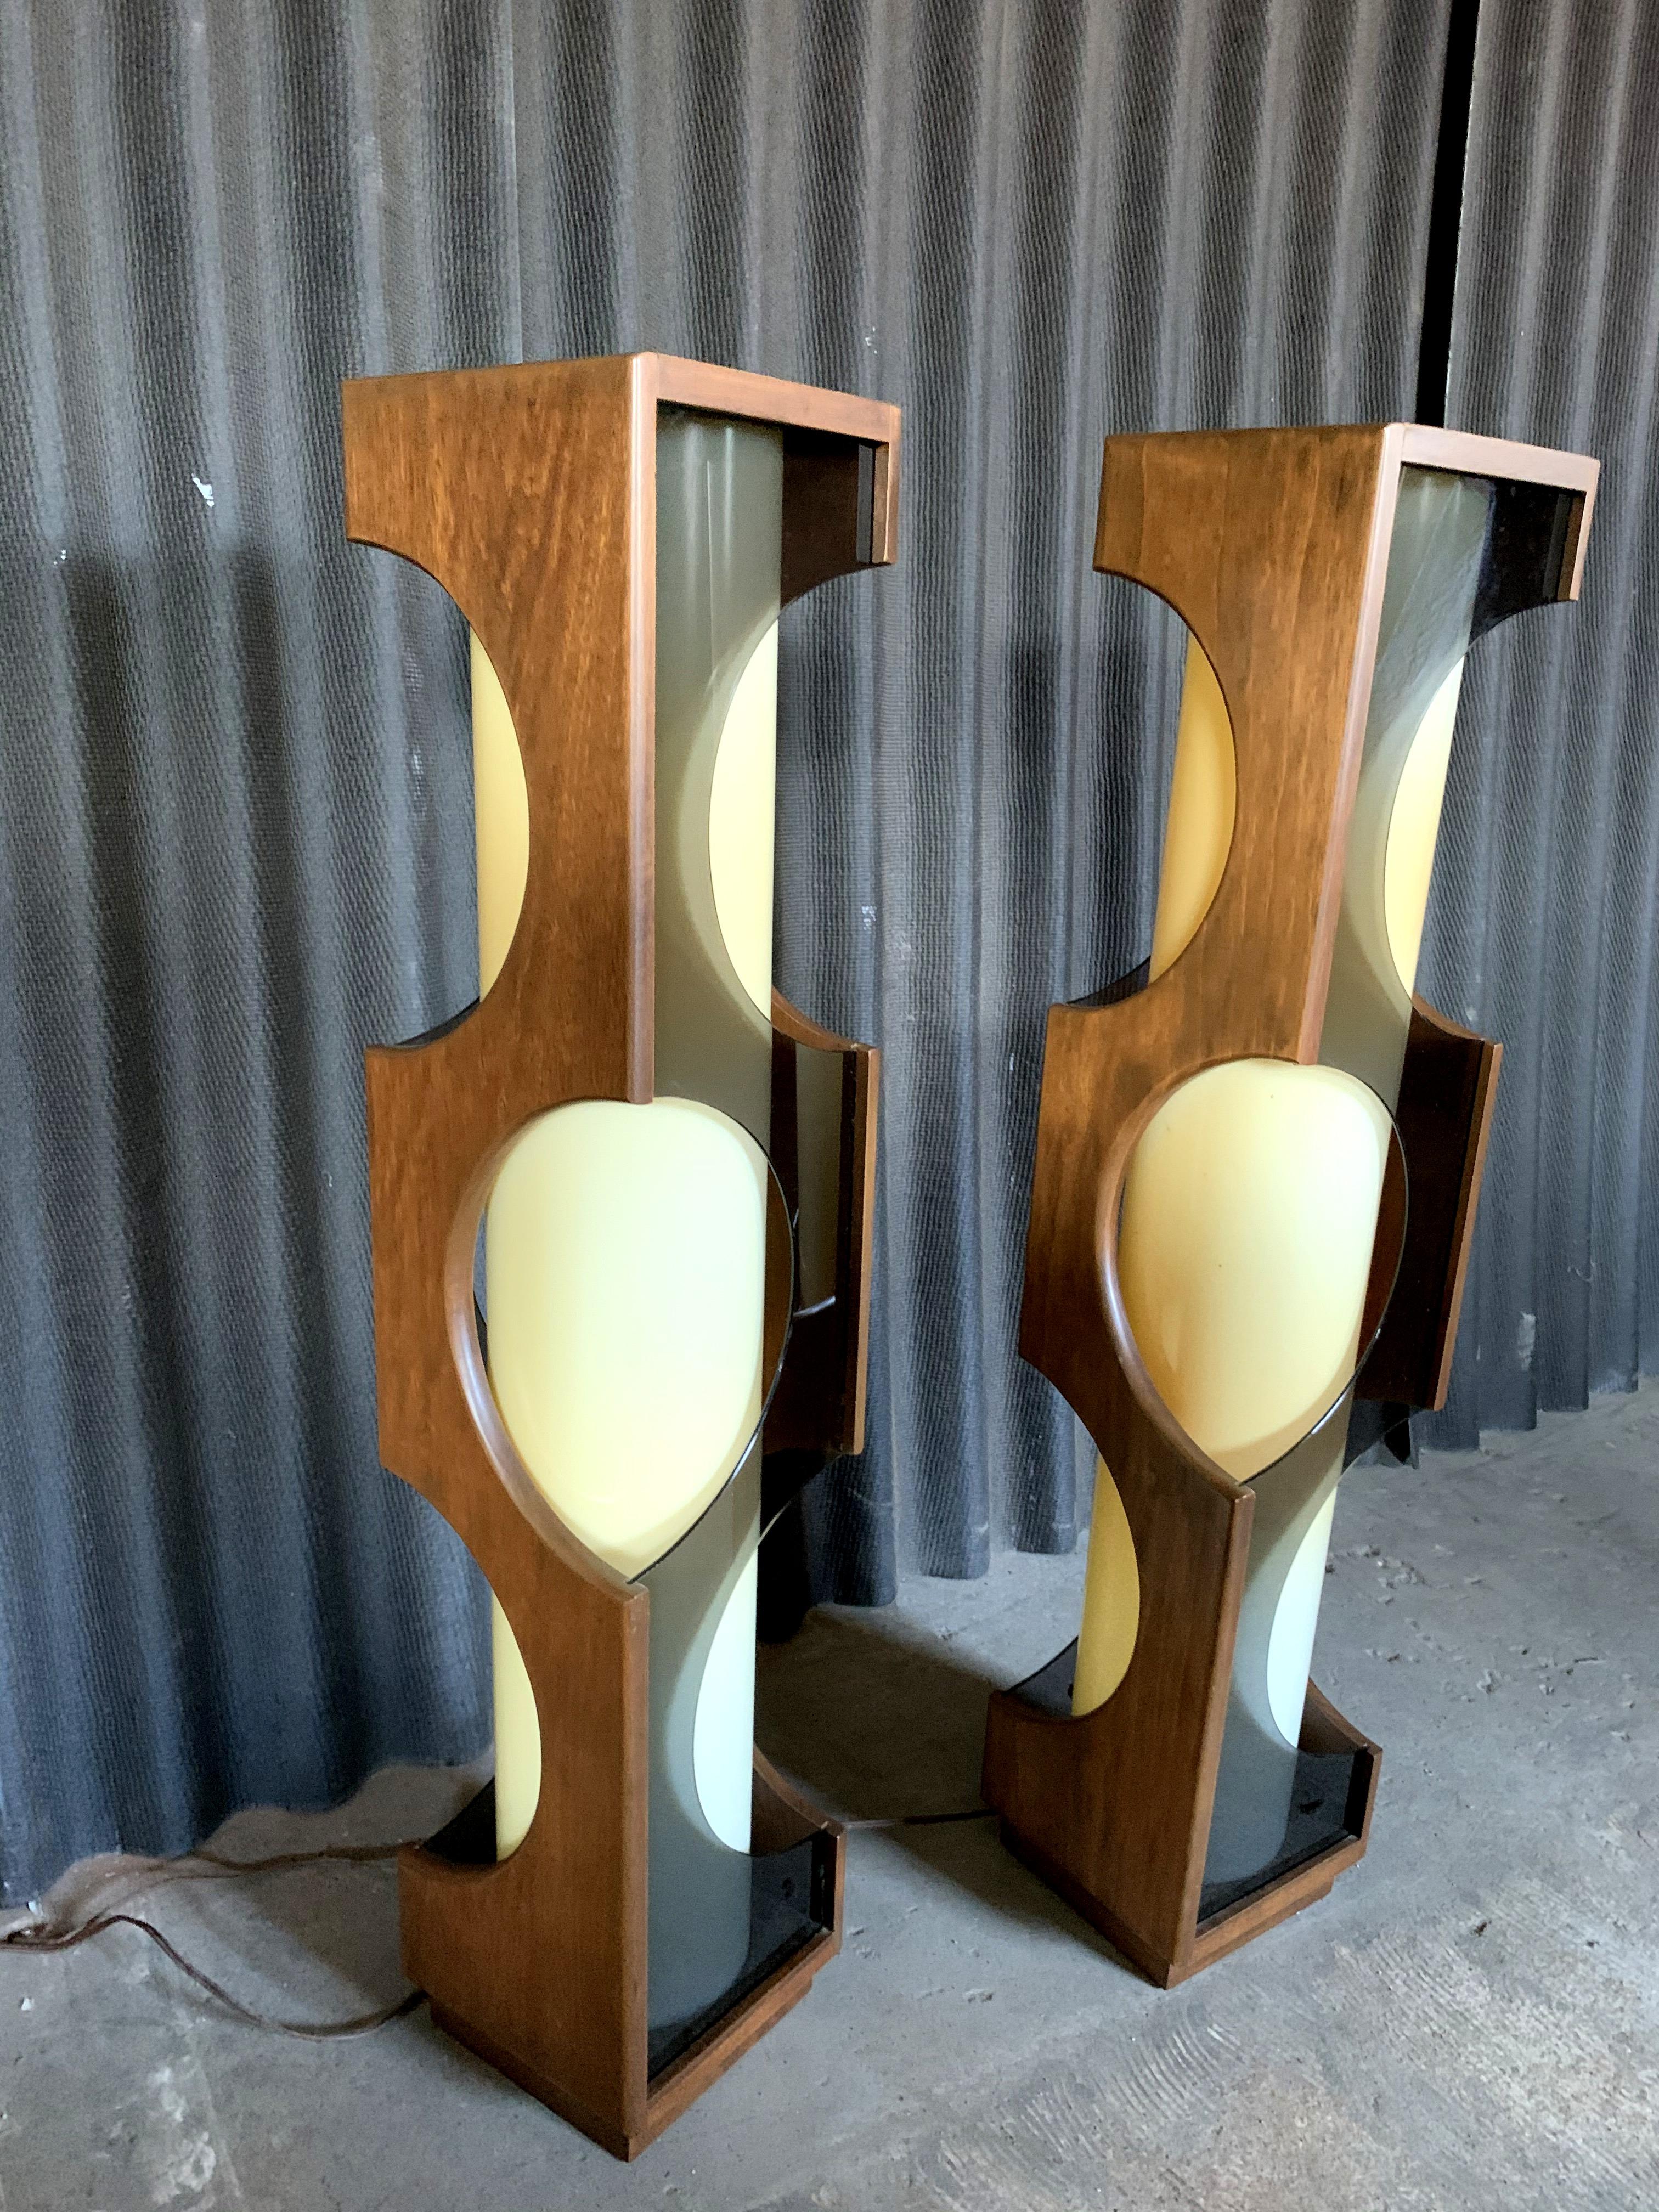 Incredible pair of large scale lamps by Modeline of California.
Walnut wood.
No breaks or chips anywhere.
Smoked Lucite.
Center is an opaque acrylic cylinder which houses two bulbs each.
Cylinders have yellowing as shown in the photos. Not